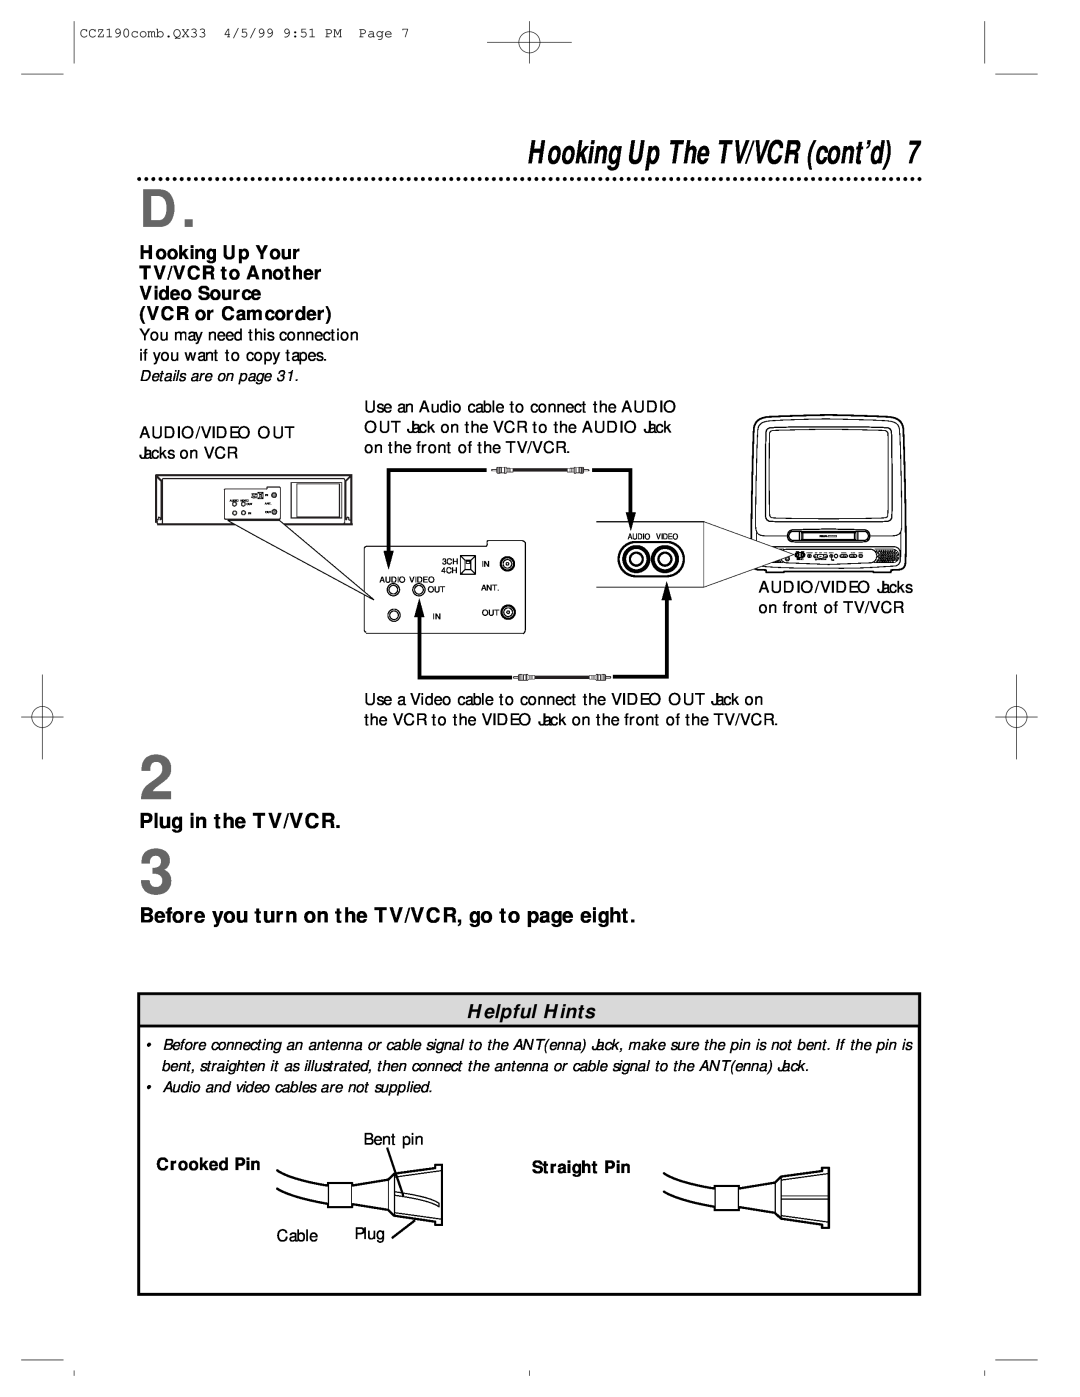 Magnavox CCZ190AT Hooking Up The TV/VCR cont’d, Plug in the TV/VCR, Before you turn on the TV/VCR, go to page eight 